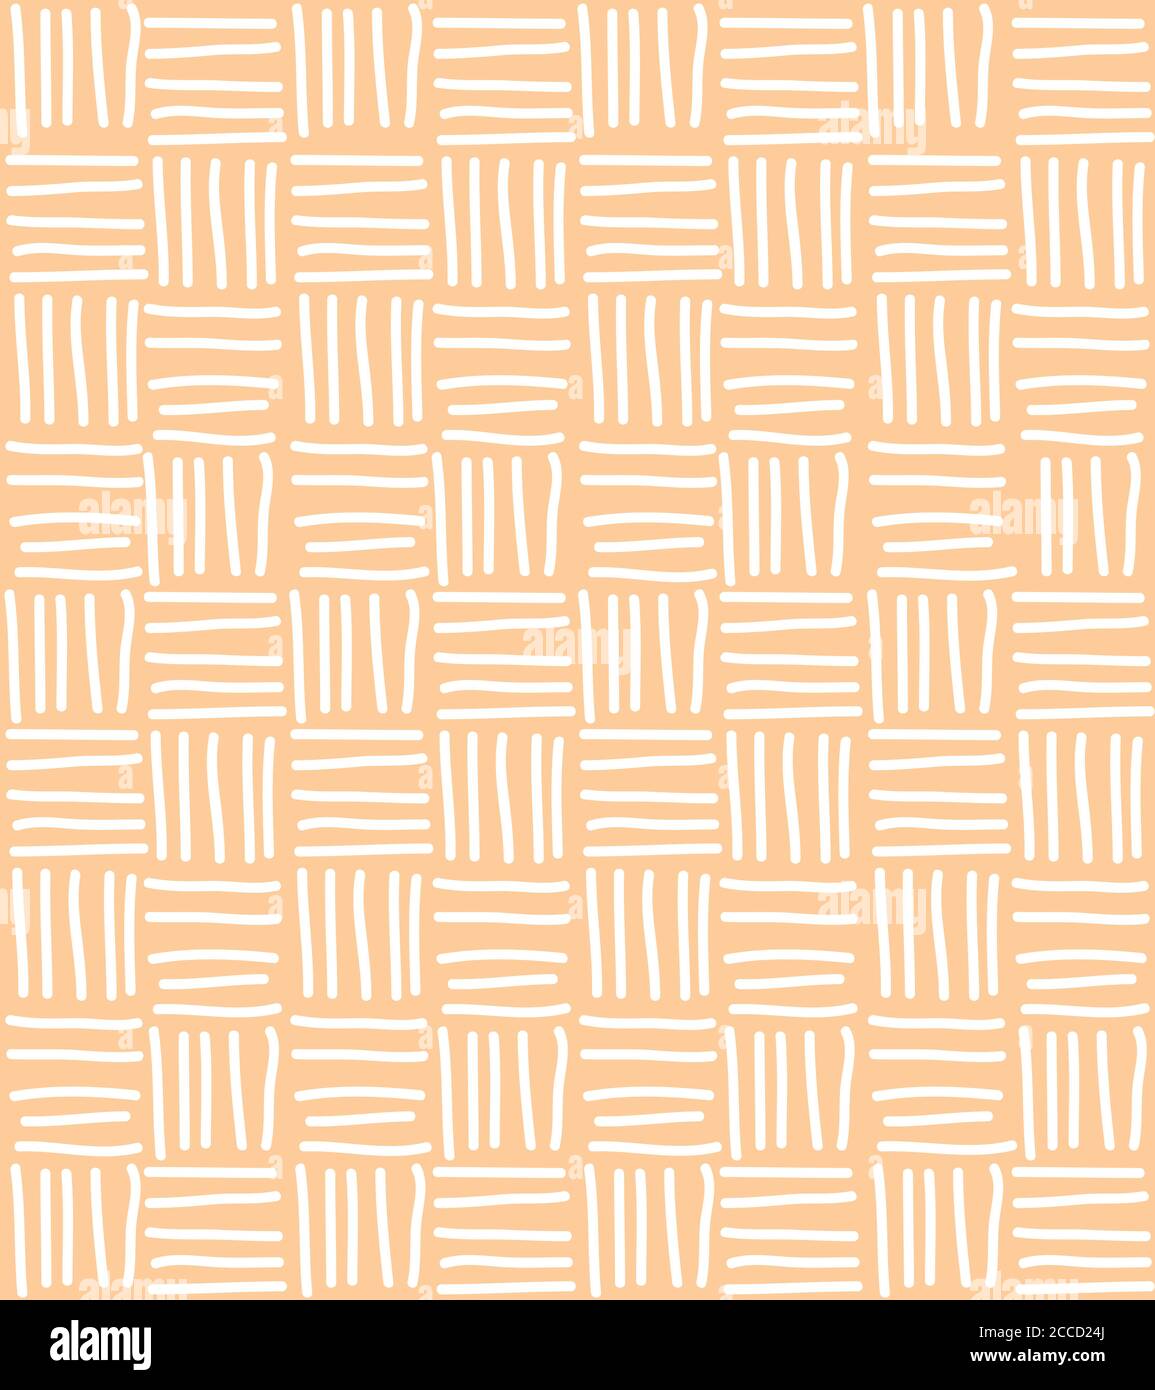 Seamless pattern with hand drawn chevron line grid, vector illustration Stock Vector